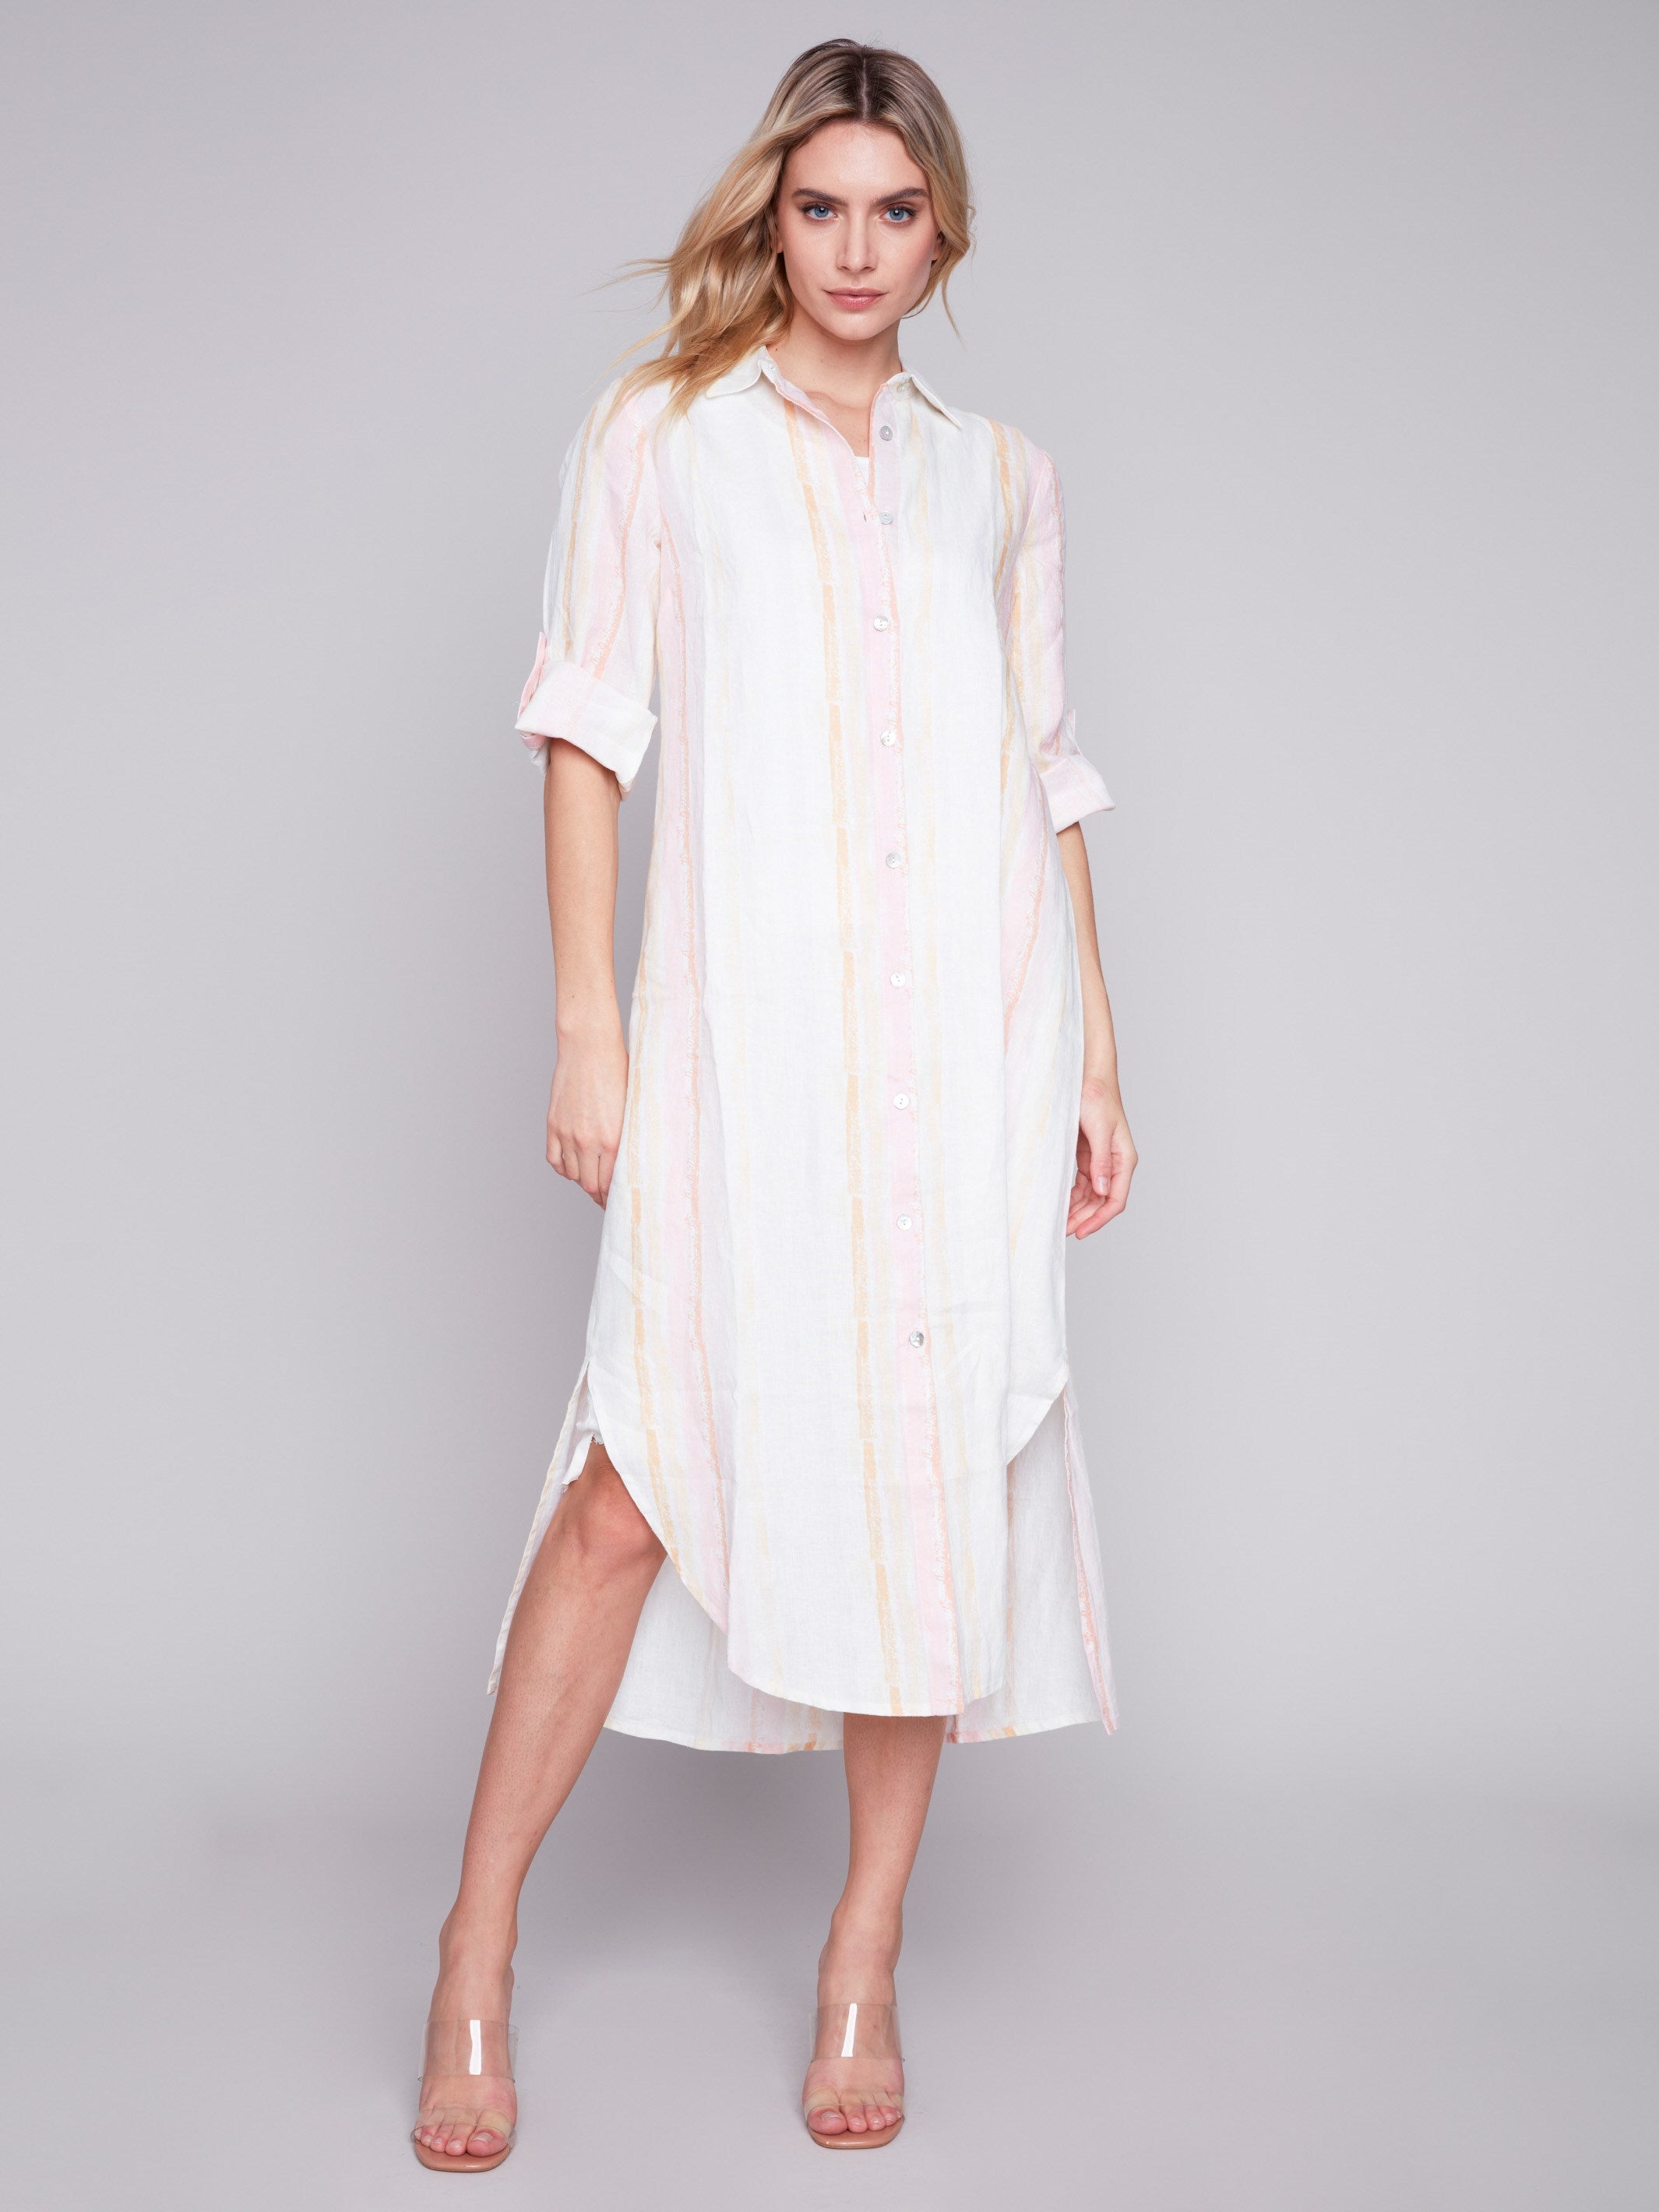 Striped Long Linen Tunic Dress - Tulip - Charlie B Collection Canada - Image 1